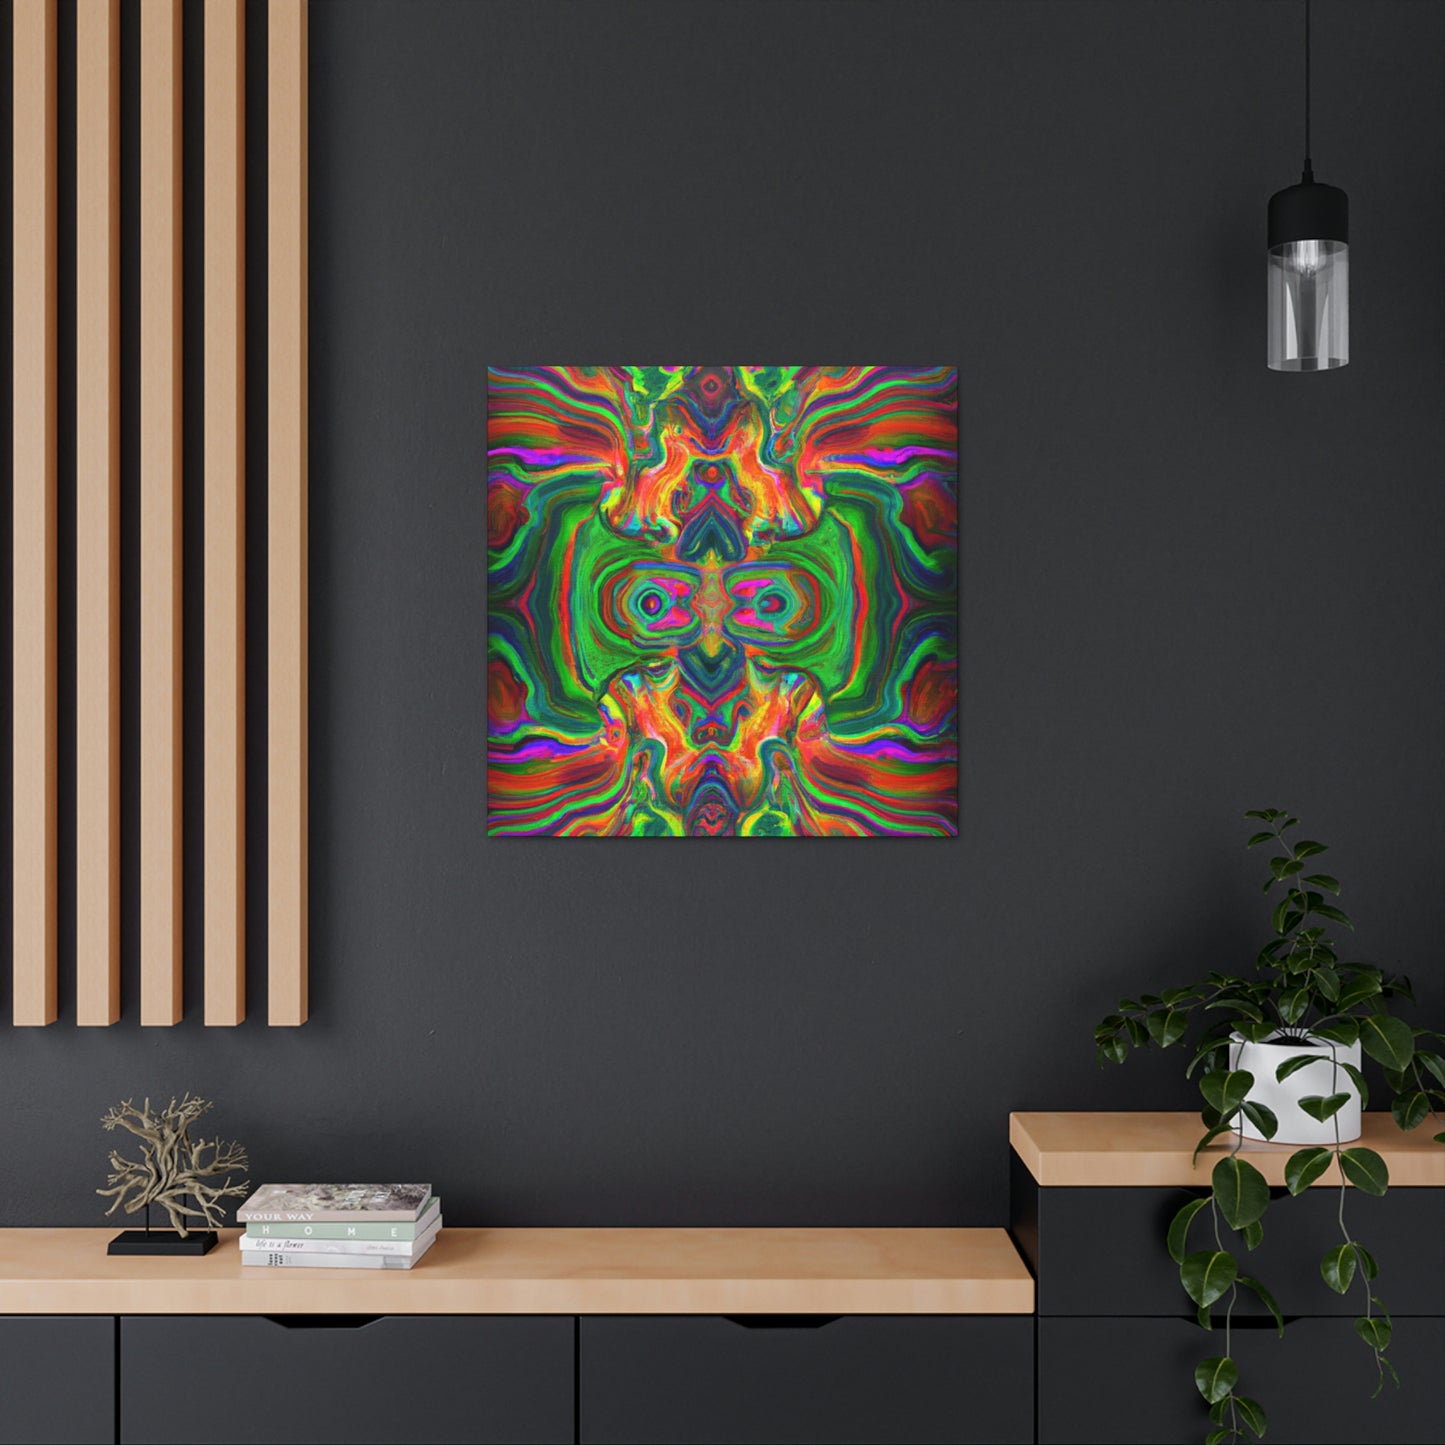 Adelaide Curie - Psychedelic Canvas Wall Art